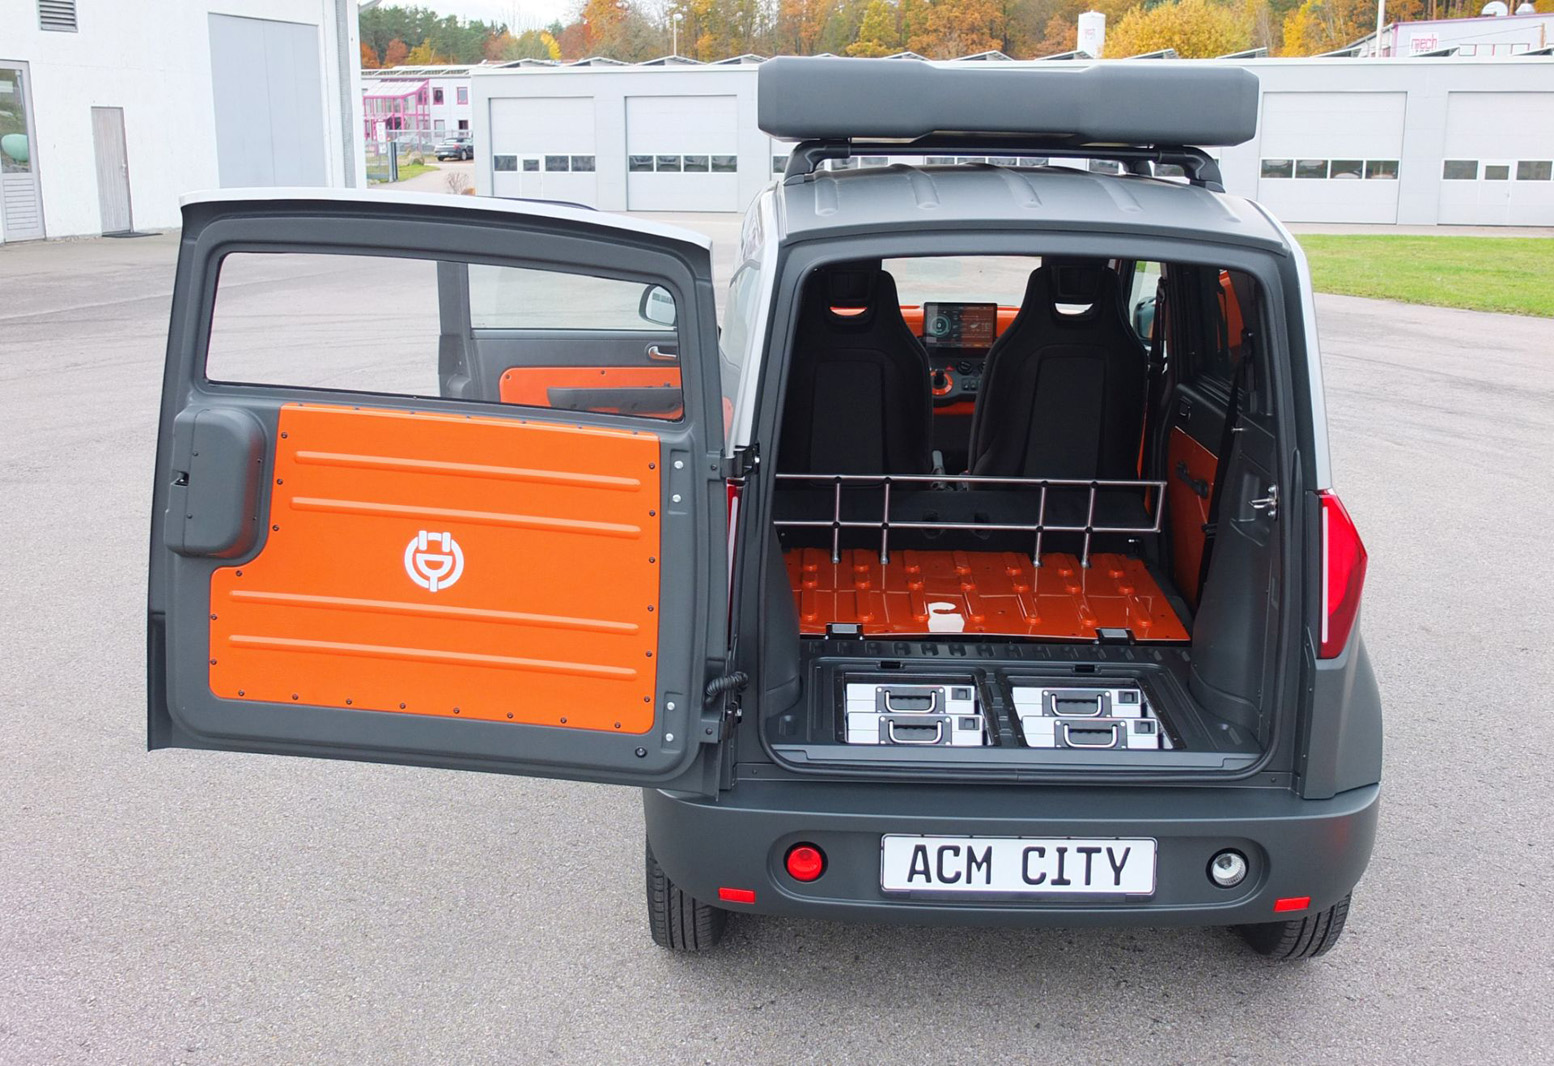 New ACM City One is battery-swapping urban EV